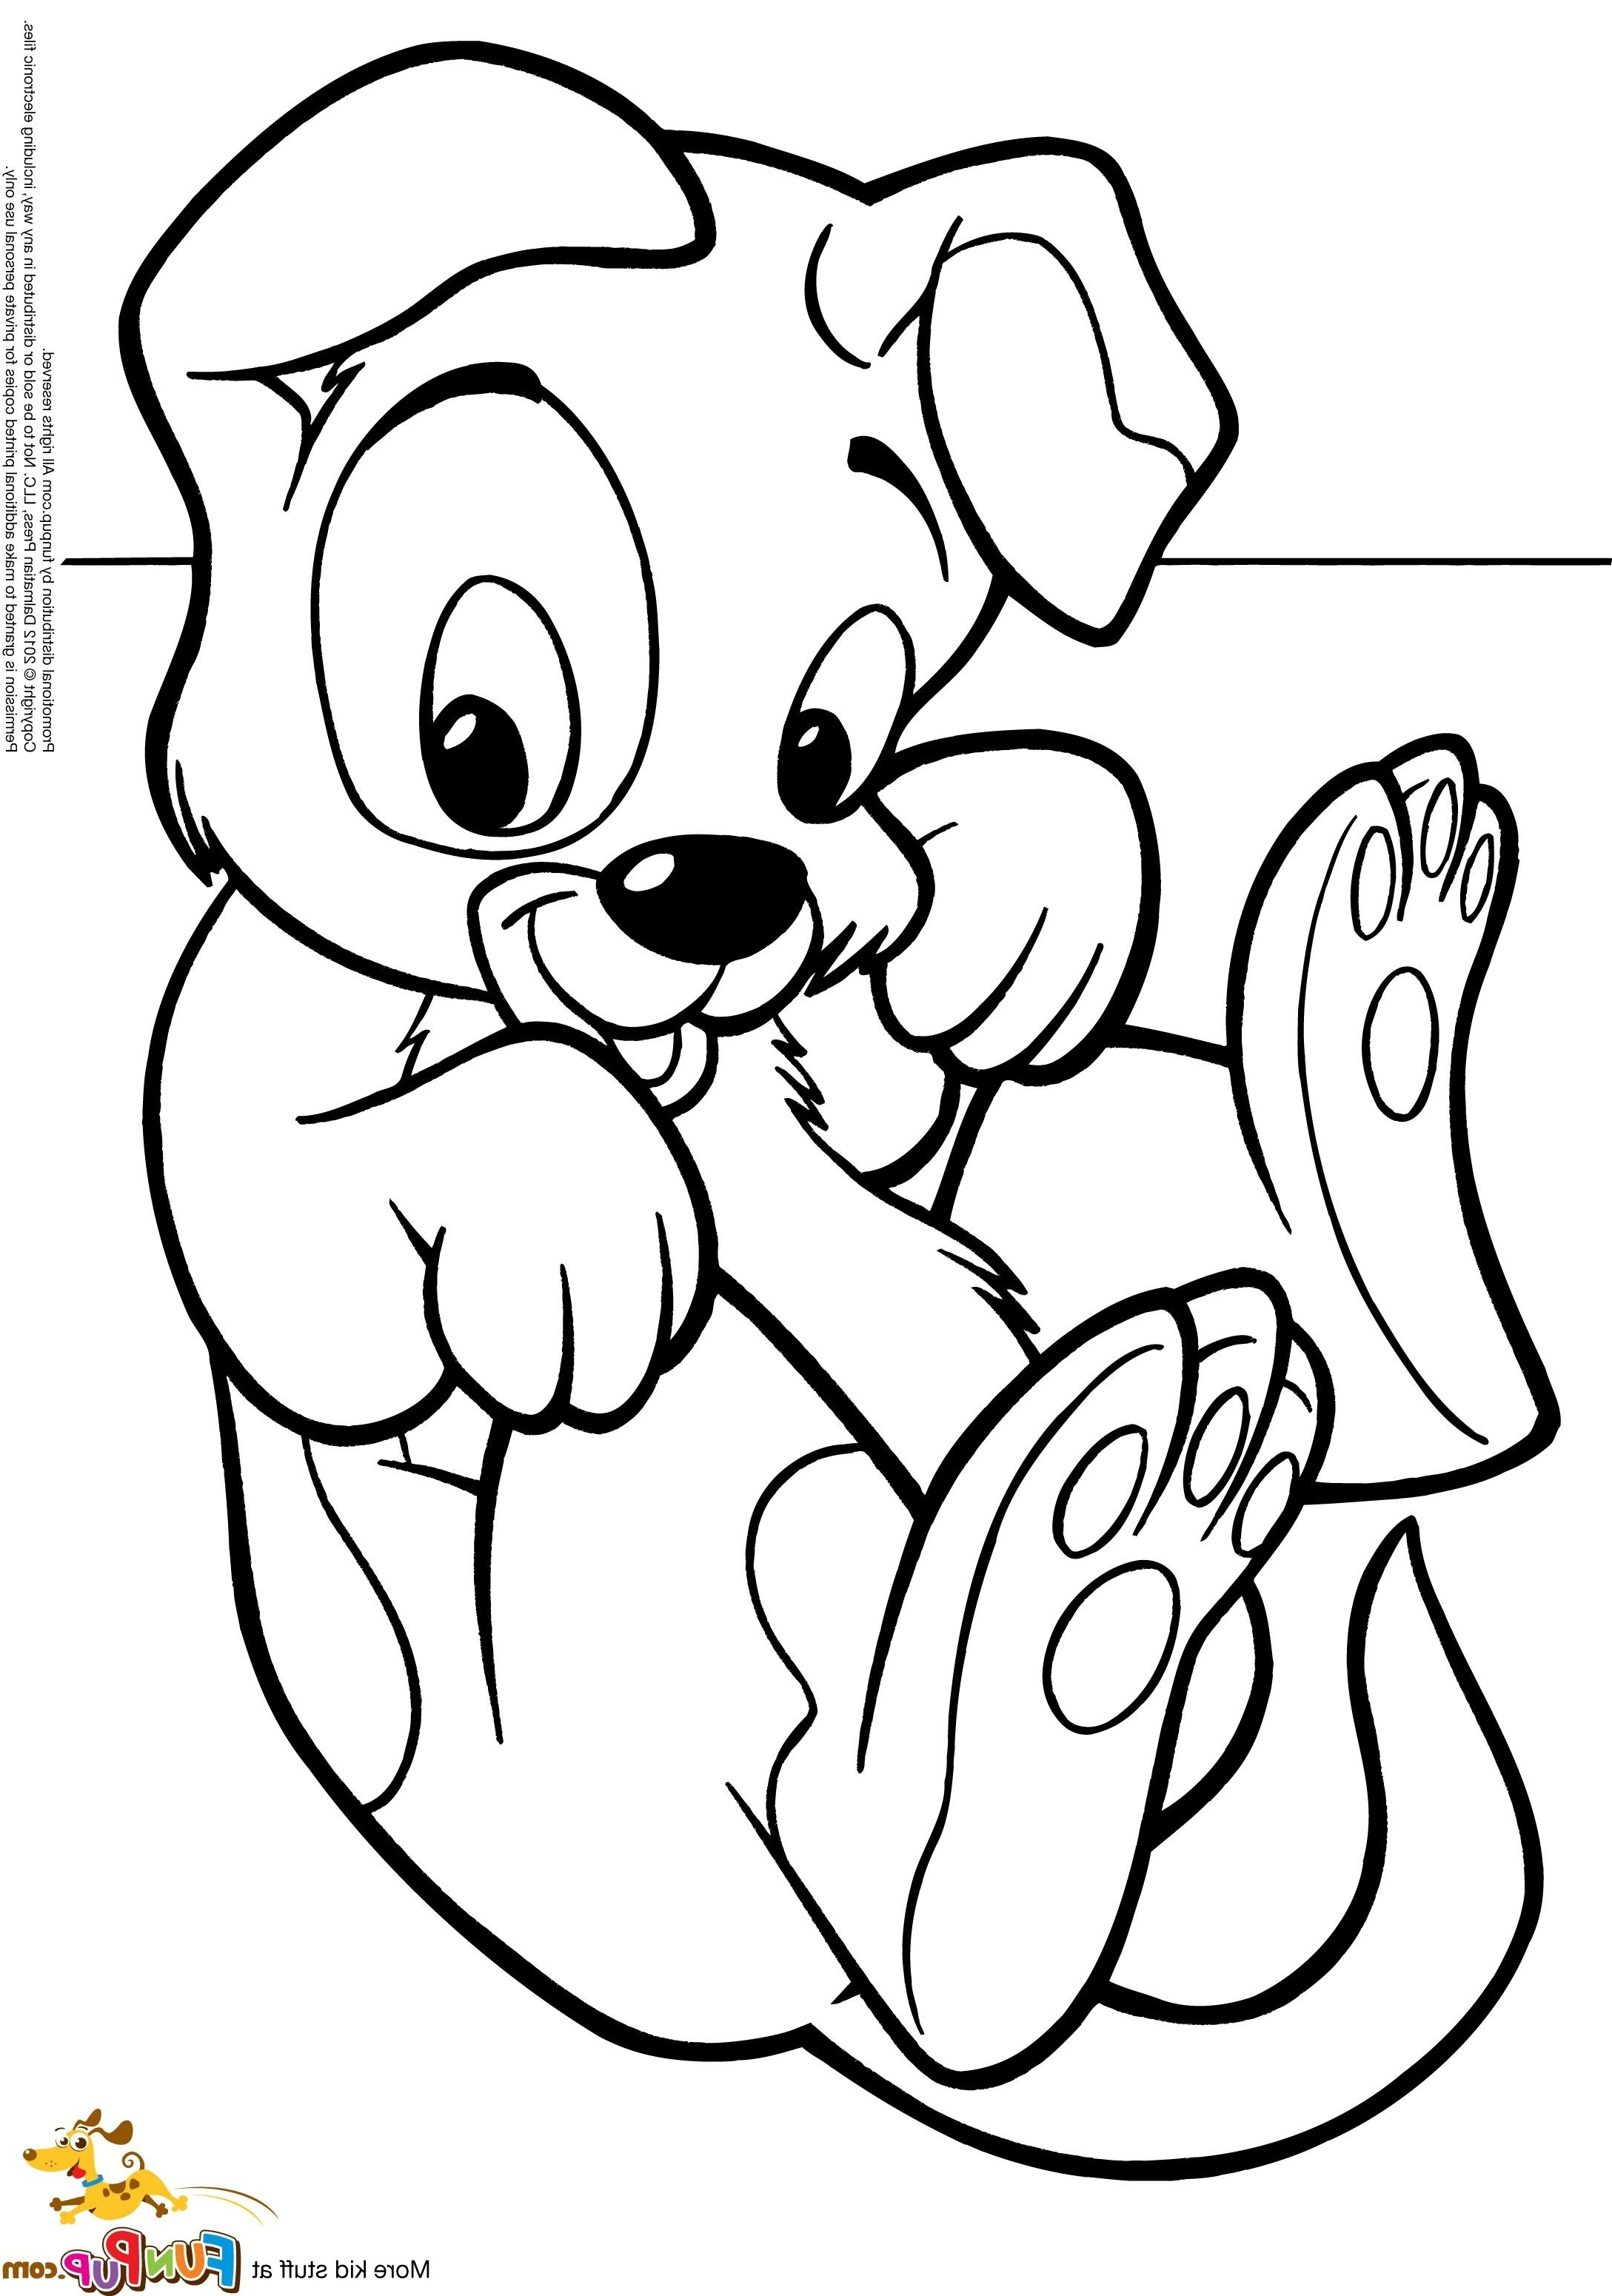 Interactive Coloring Pages Coloring Pages Coloring Books Phenomenalree Puppy Photo Ideasor